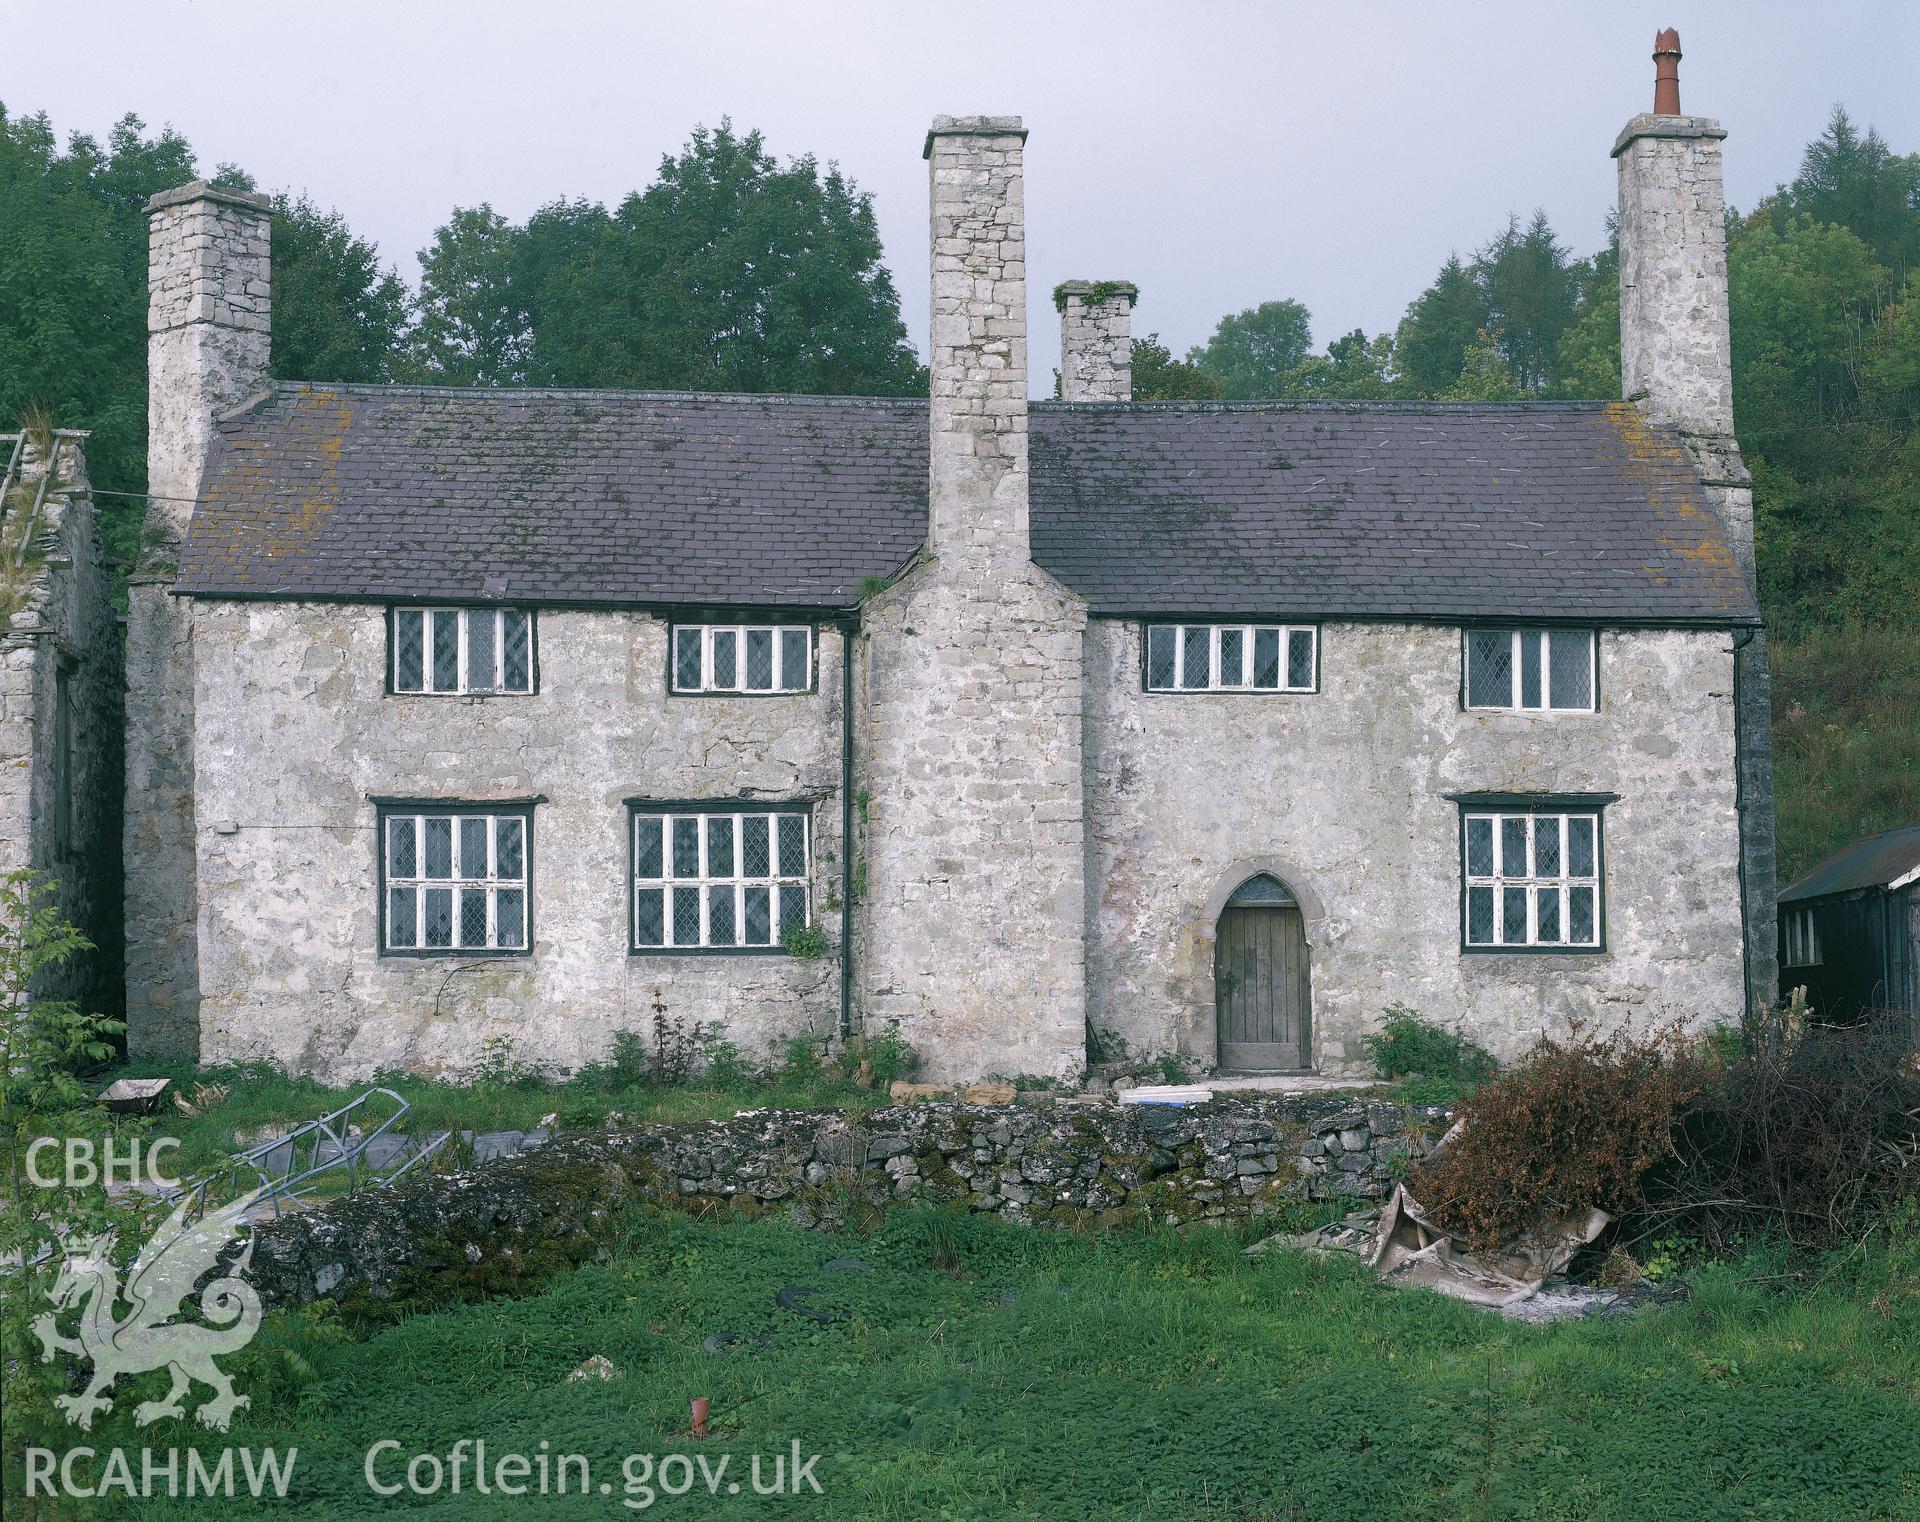 RCAHMW colour transparency showing view of Plas Uchaf, near Ruthin.